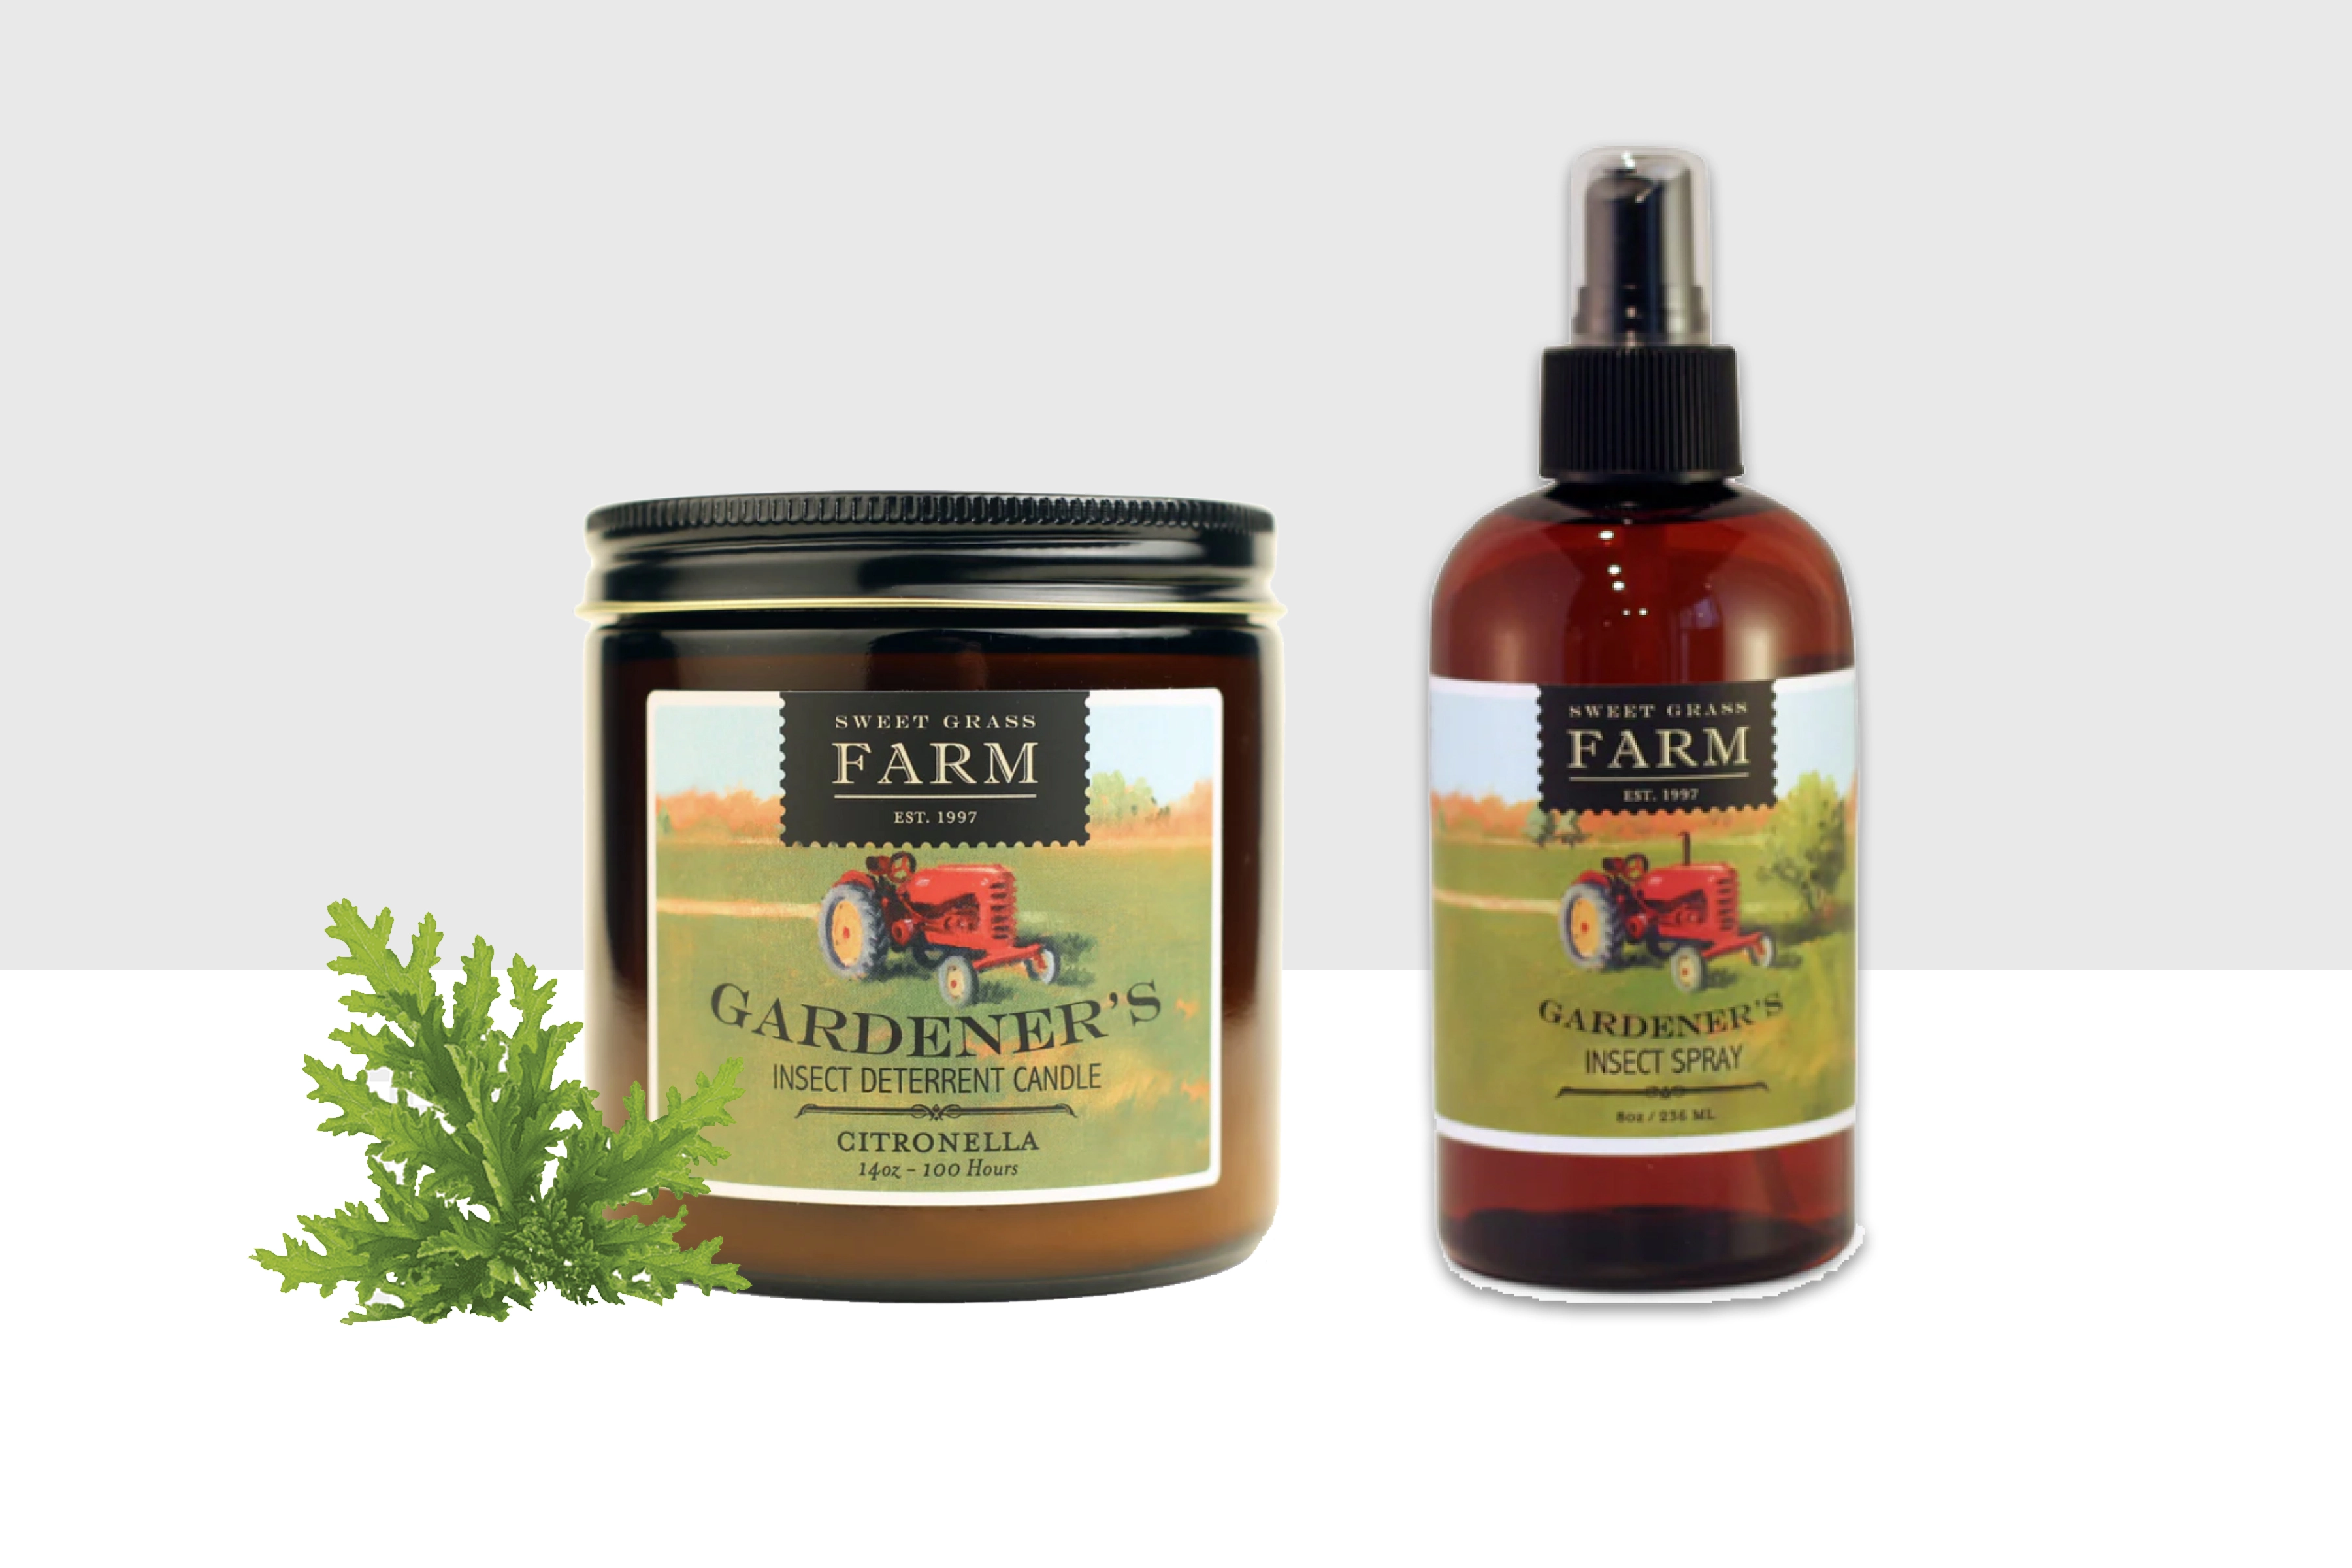 Sweet Grass Farm products